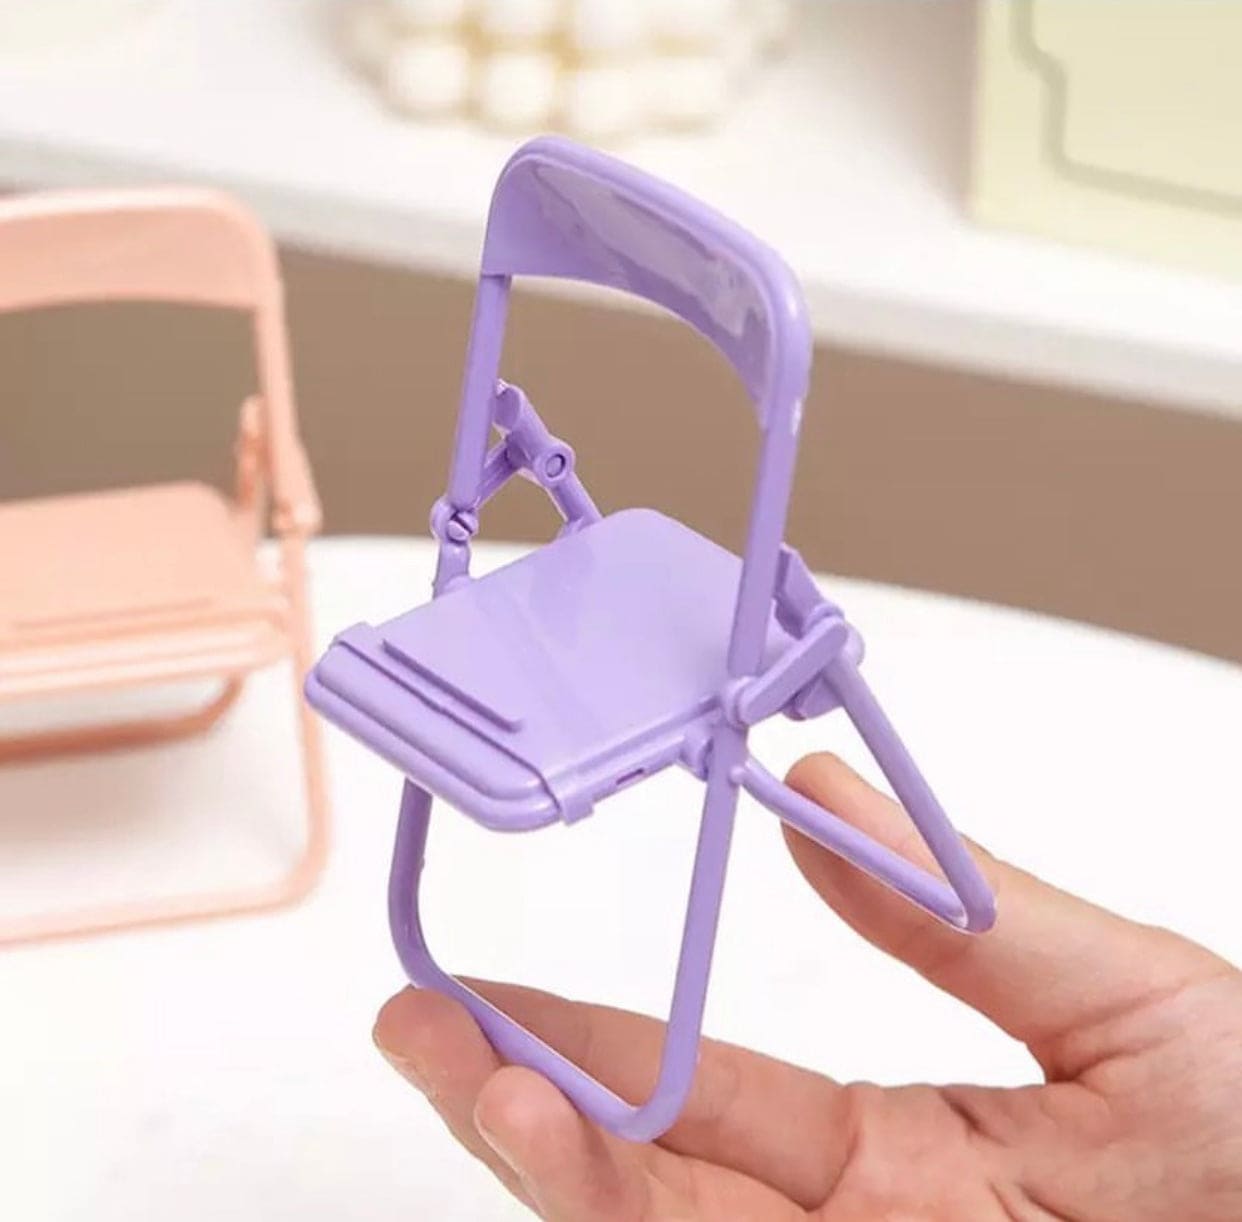 Cute Chair Shaped Foldable Lazy Phone And Ipad Holder, Portable Design Mobile Phone Holder, Foldable Support Desk Mobile Phone Stand